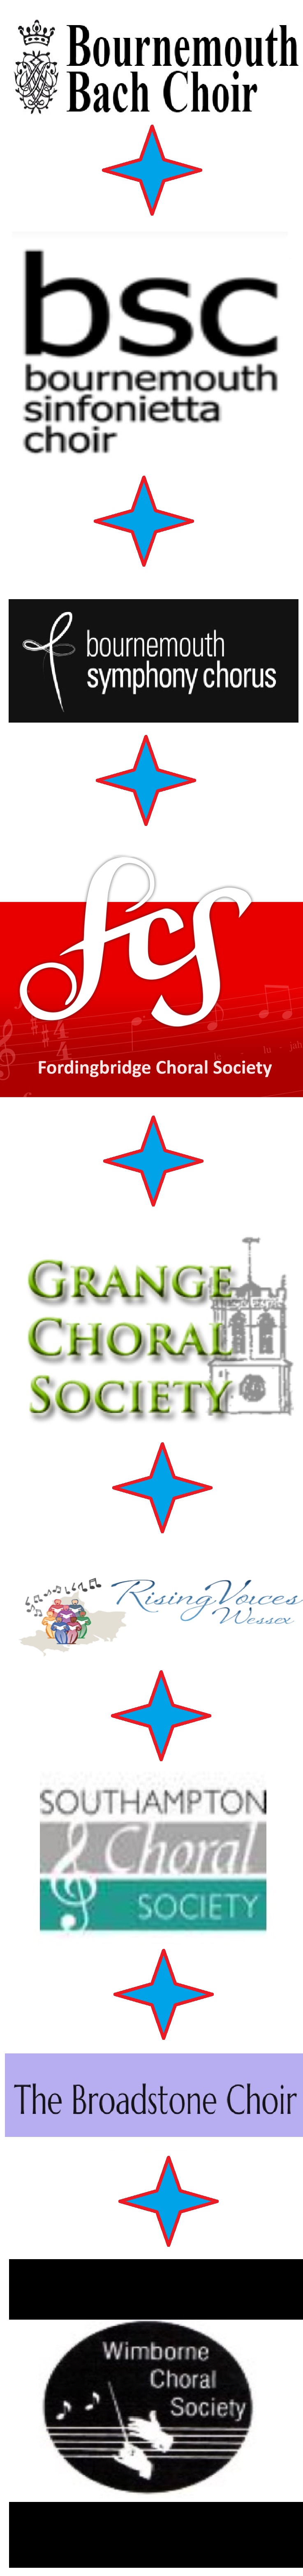 The Choirs we have helped 